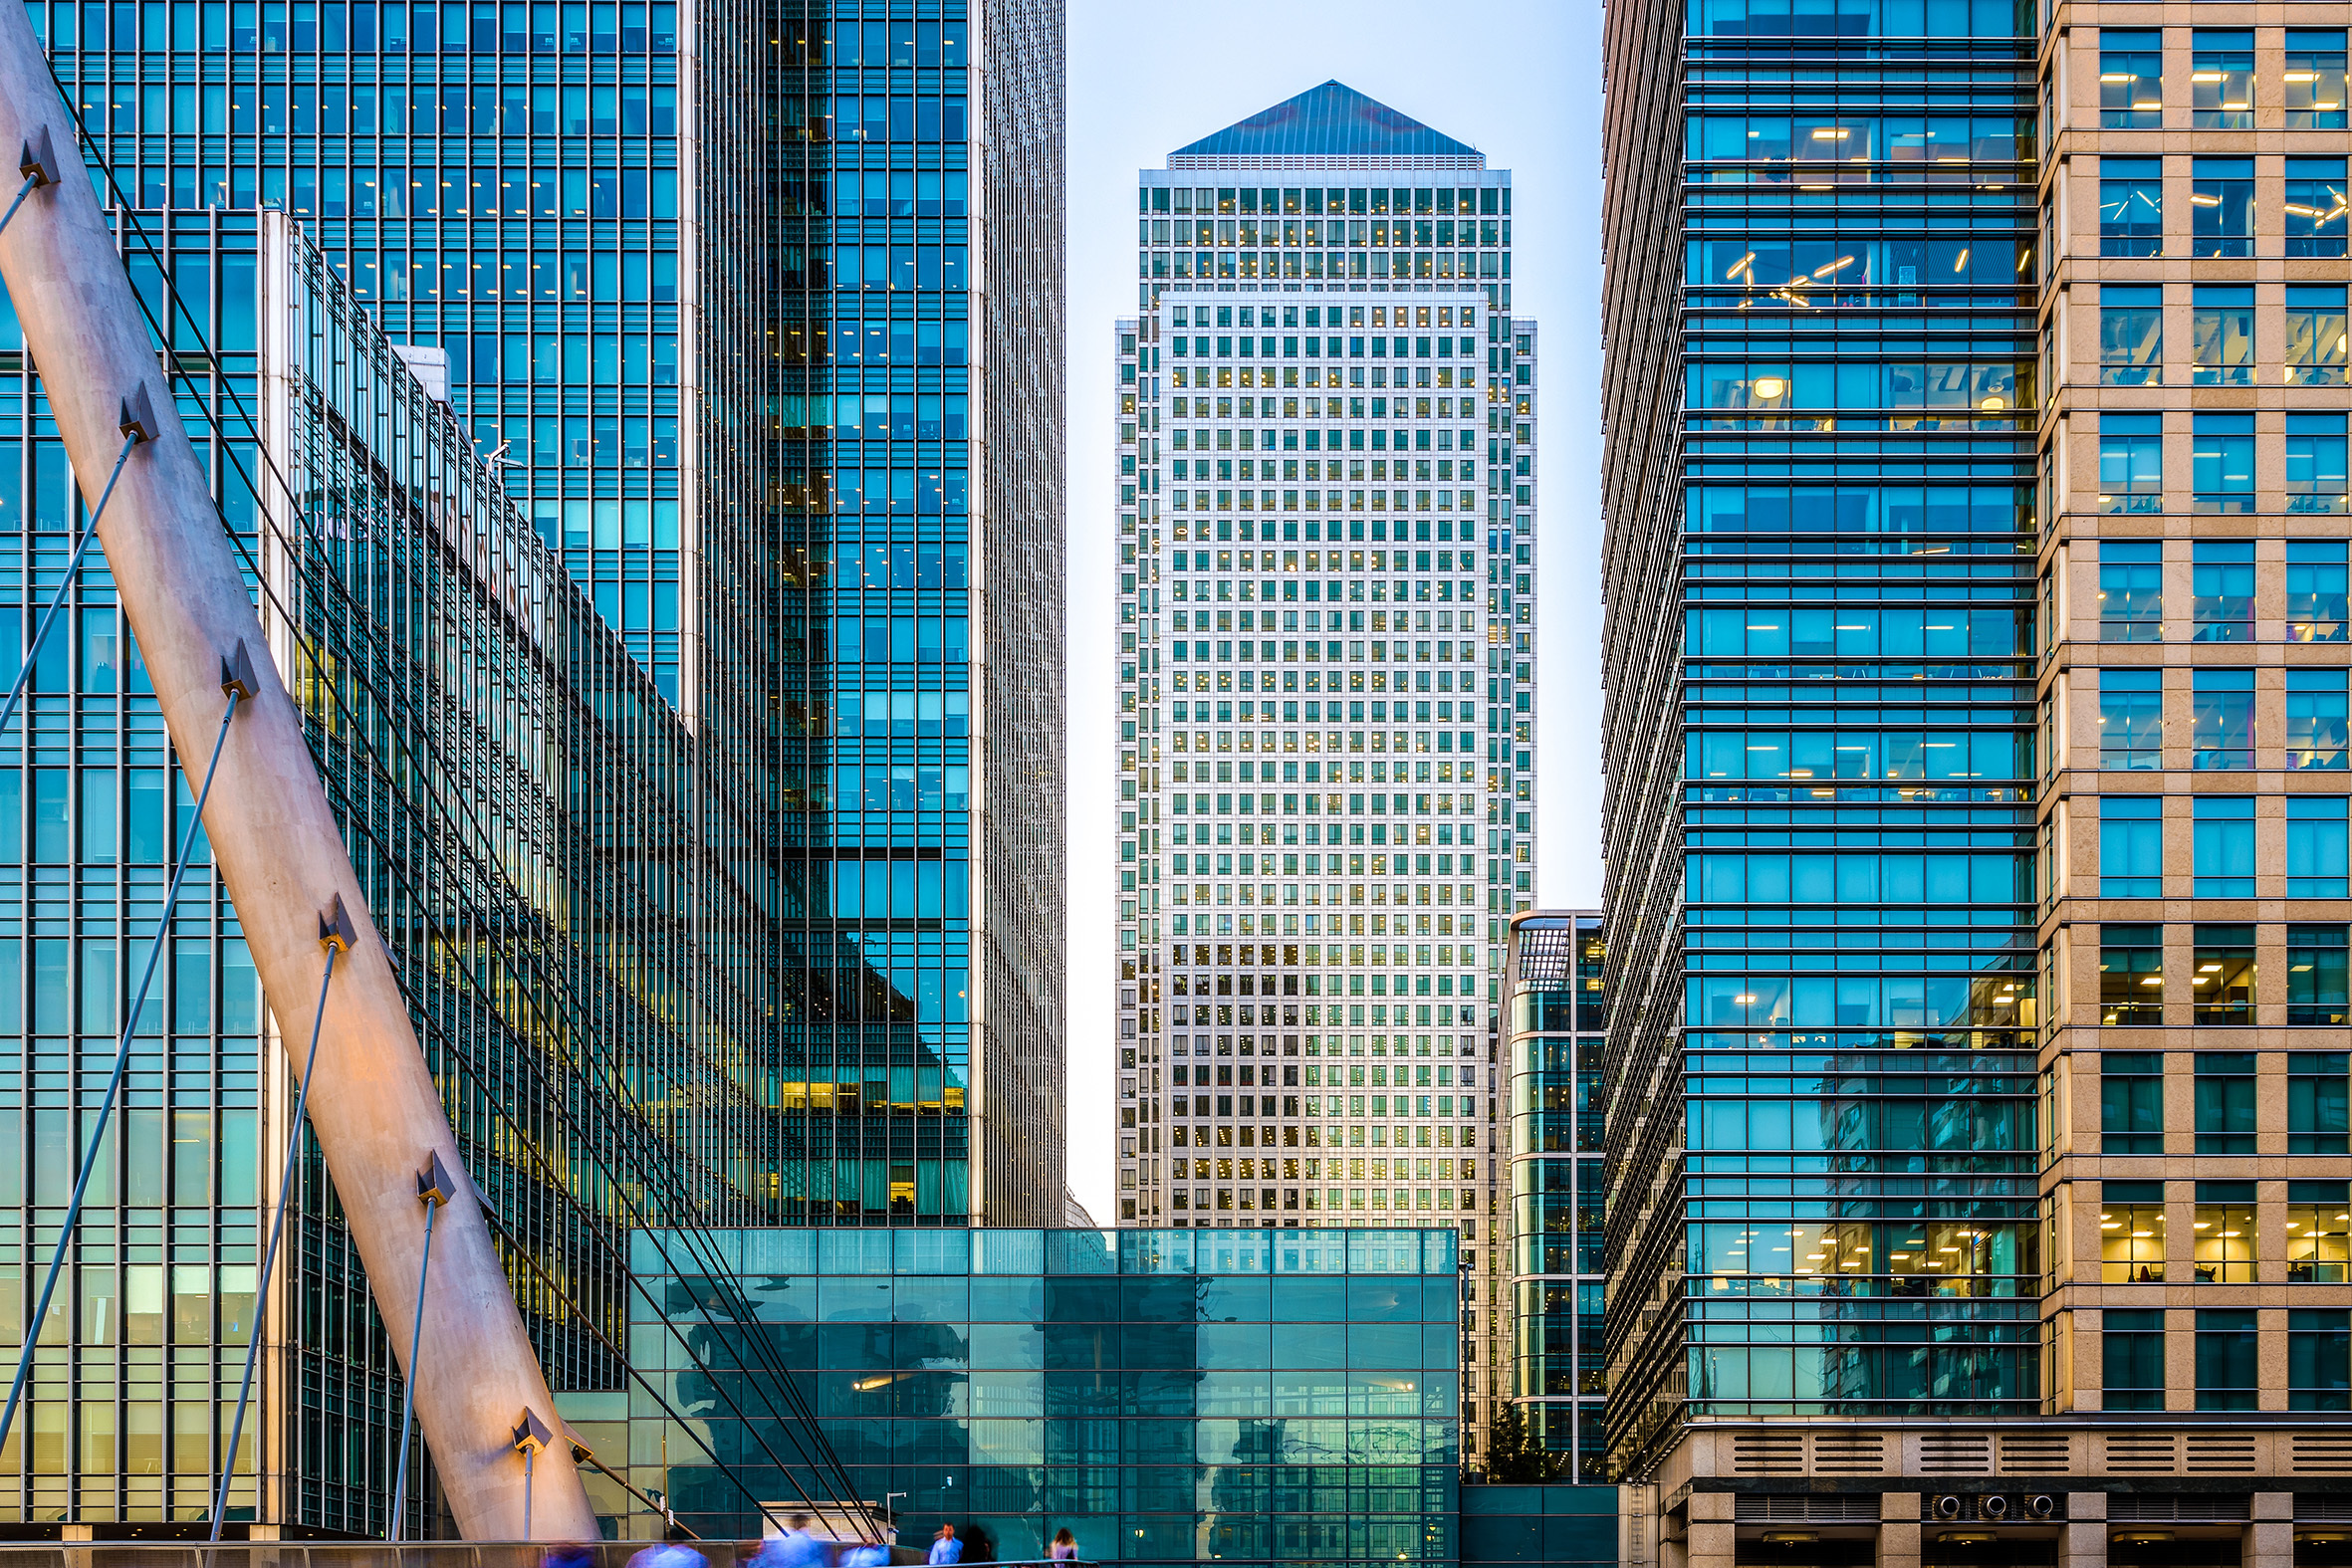 pañuelo Rizado transacción Canary Wharf area guide - Find the best things to see and do in Canary Wharf